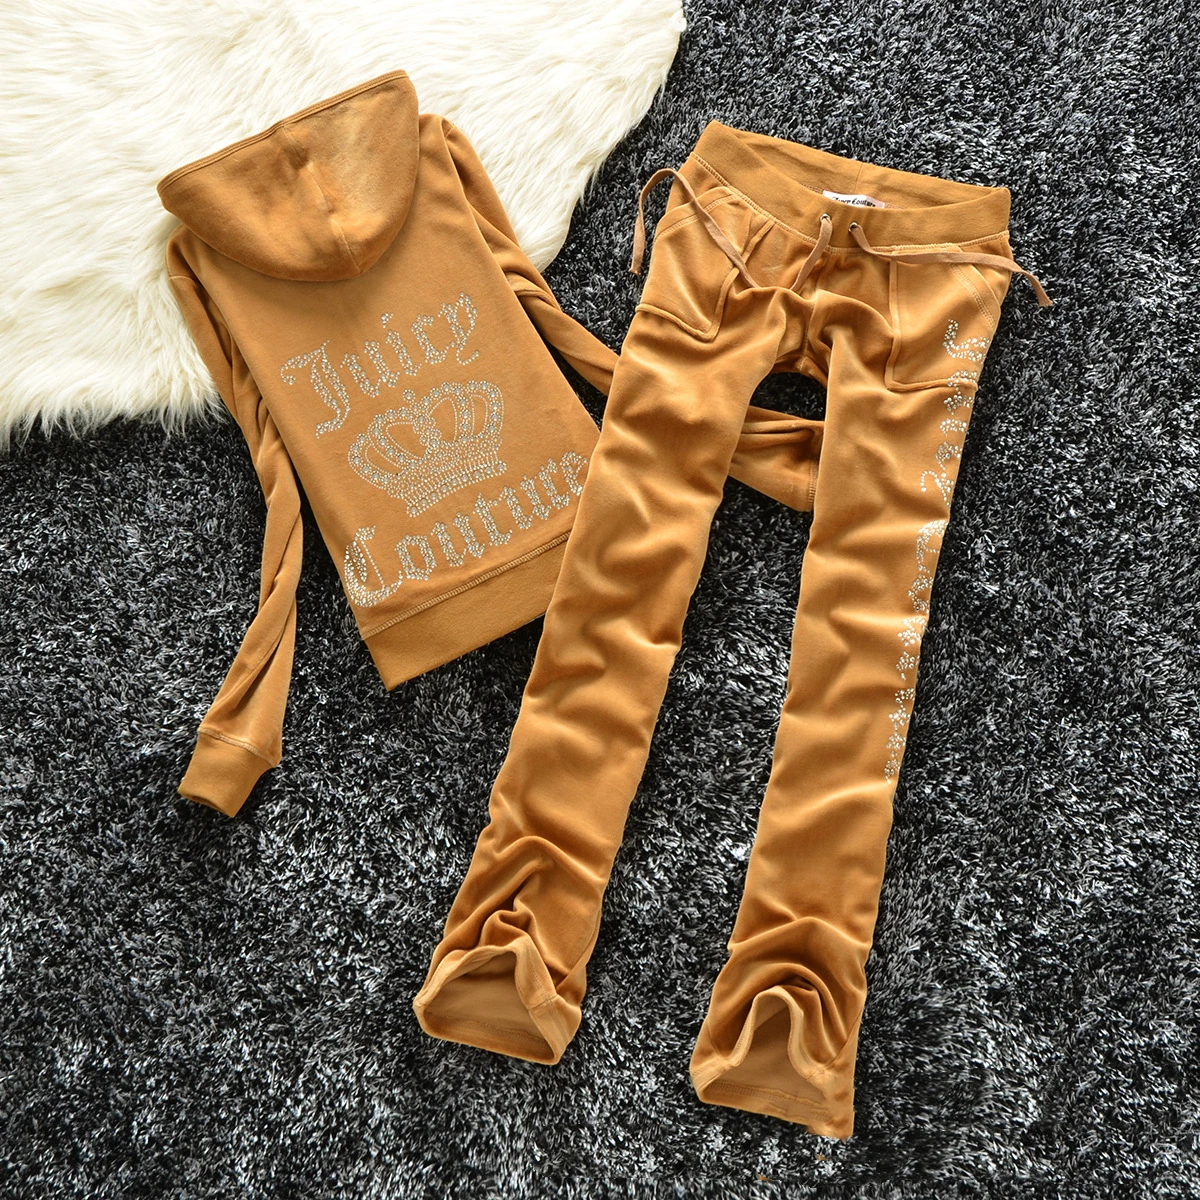 

Juicy Coutoure Women's 2 Piece Set Tracksuit Brand Velour Suit Female Sportswear Hoodies and Pants Trousers Ladies Couture Suits